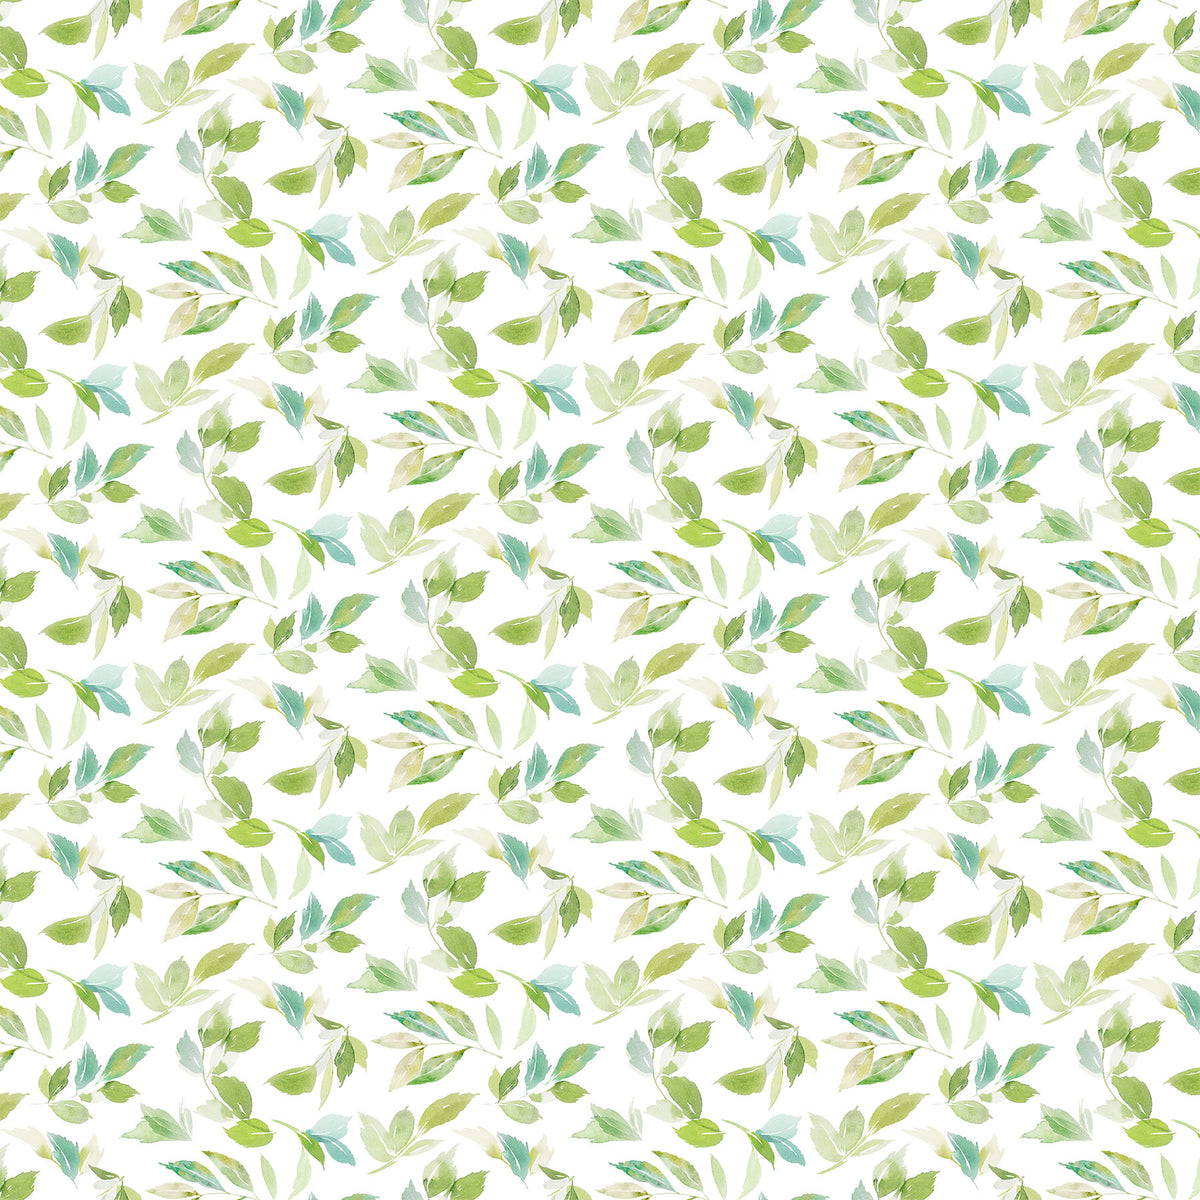 Sweet Surrender Quilt Fabric - Leaf Toss in White/Green - 26951-10